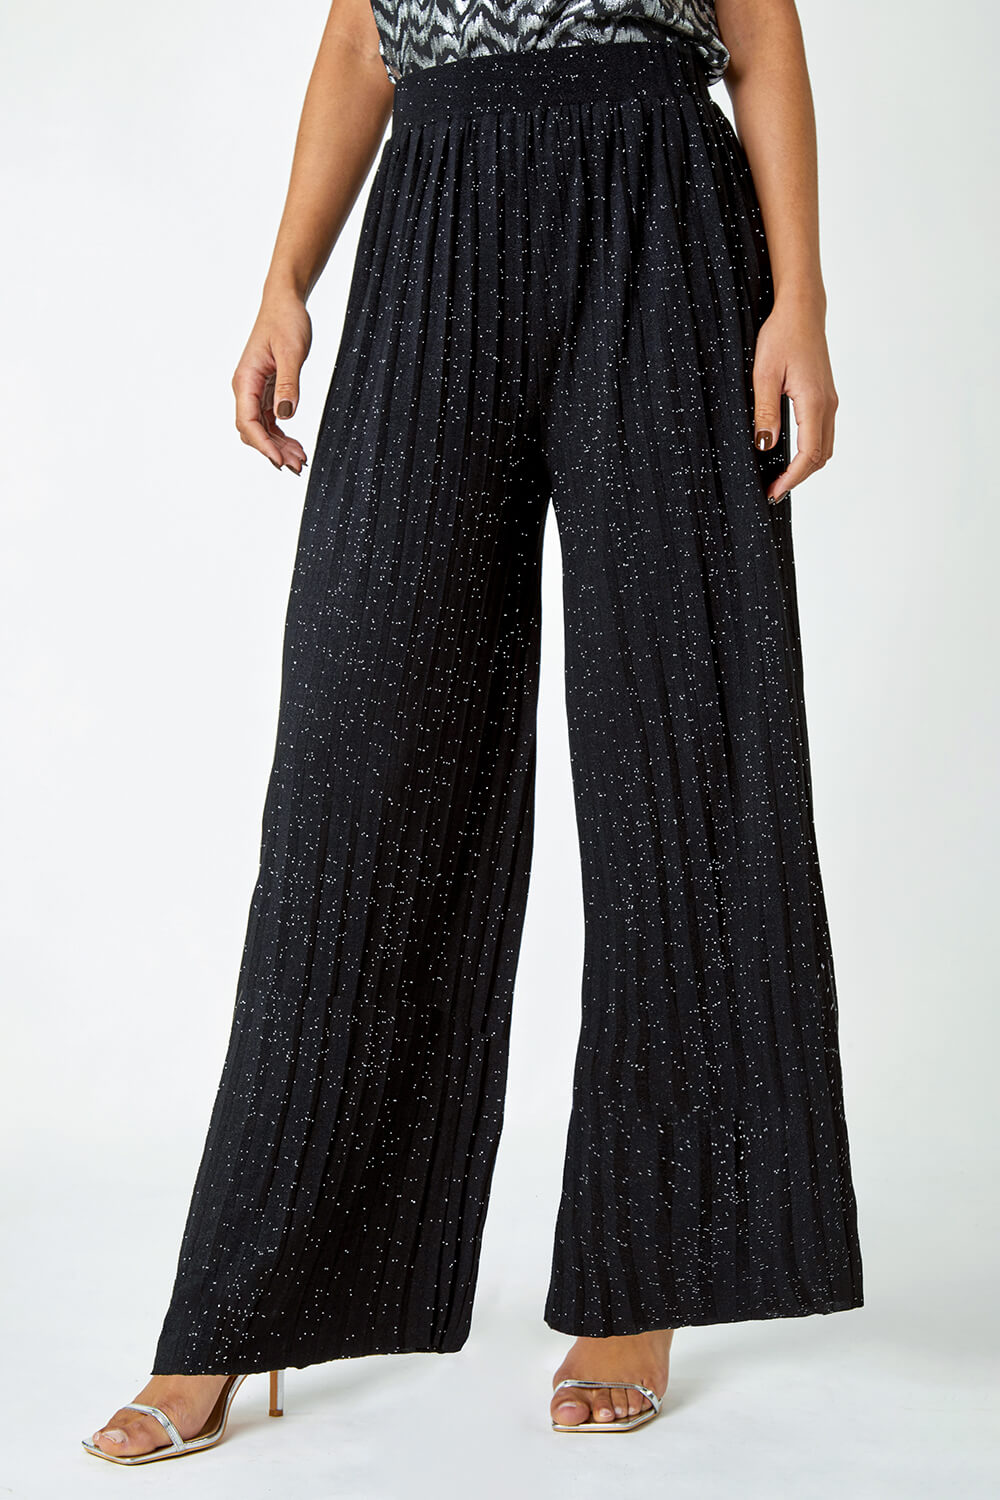 Black Pleated Glitter Stretch Trousers, Image 4 of 5